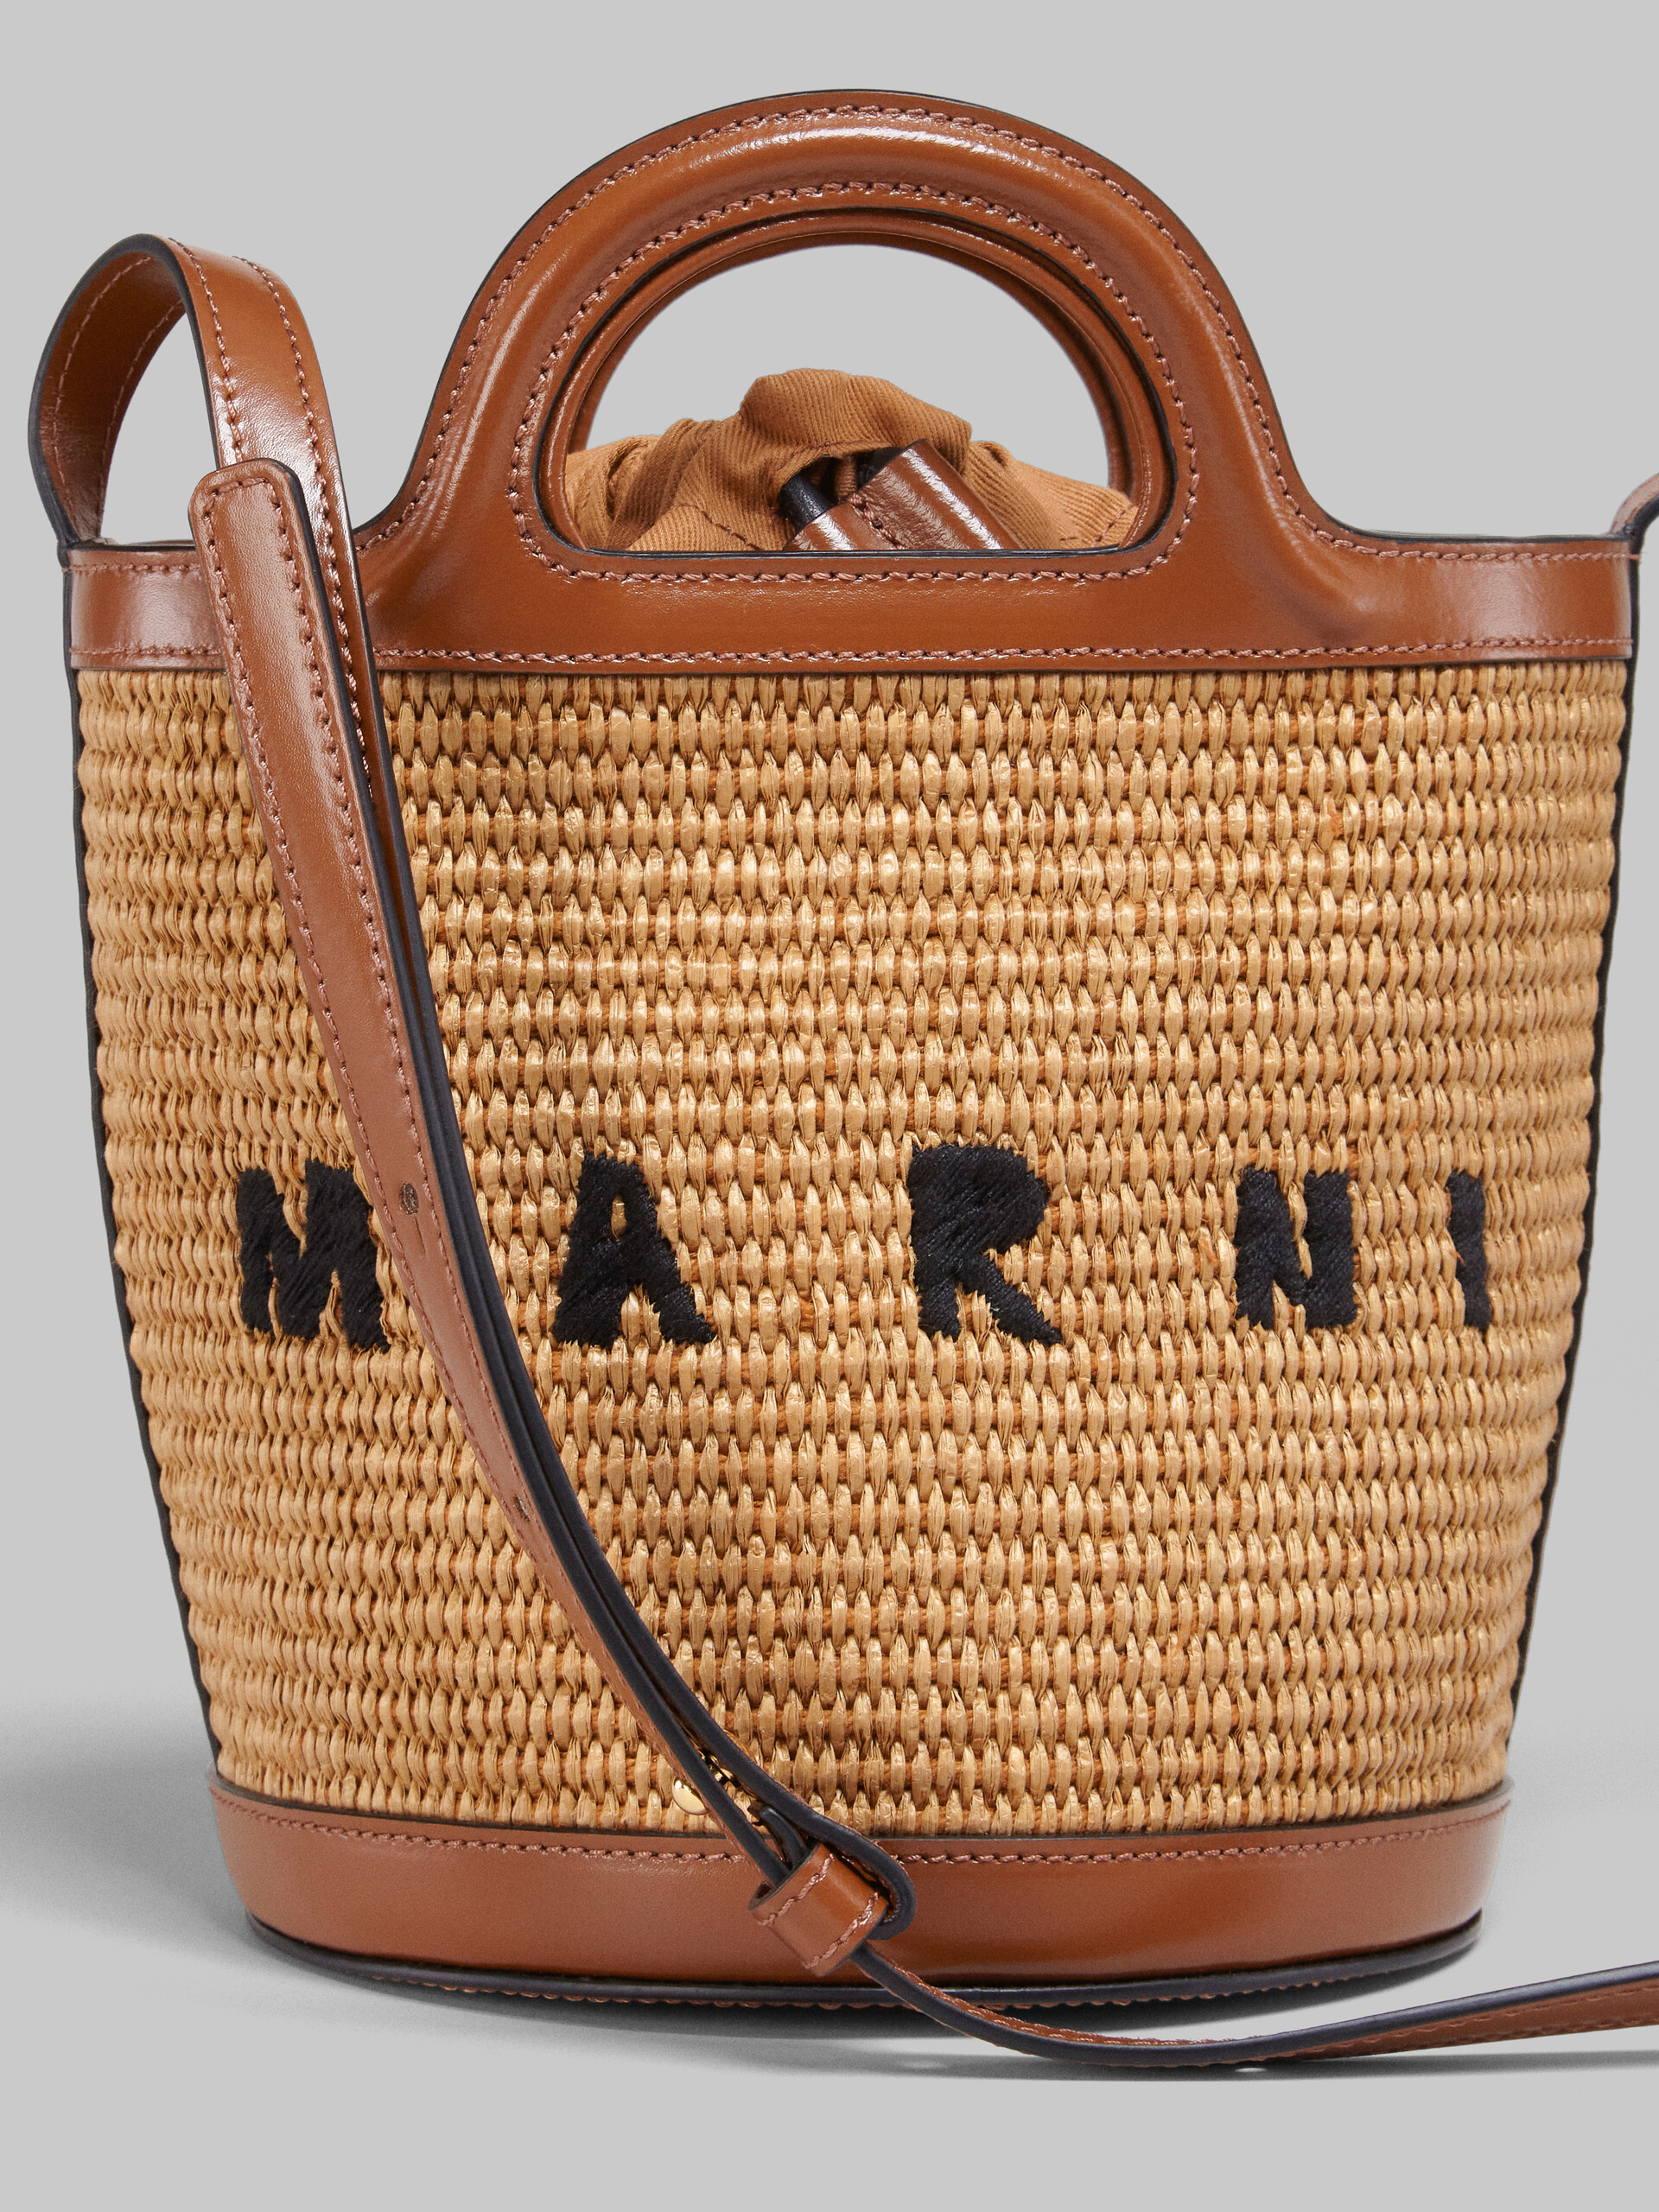 Tropicalia Small Bucket Bag in brown leather and raffia - Shoulder Bag - Image 4